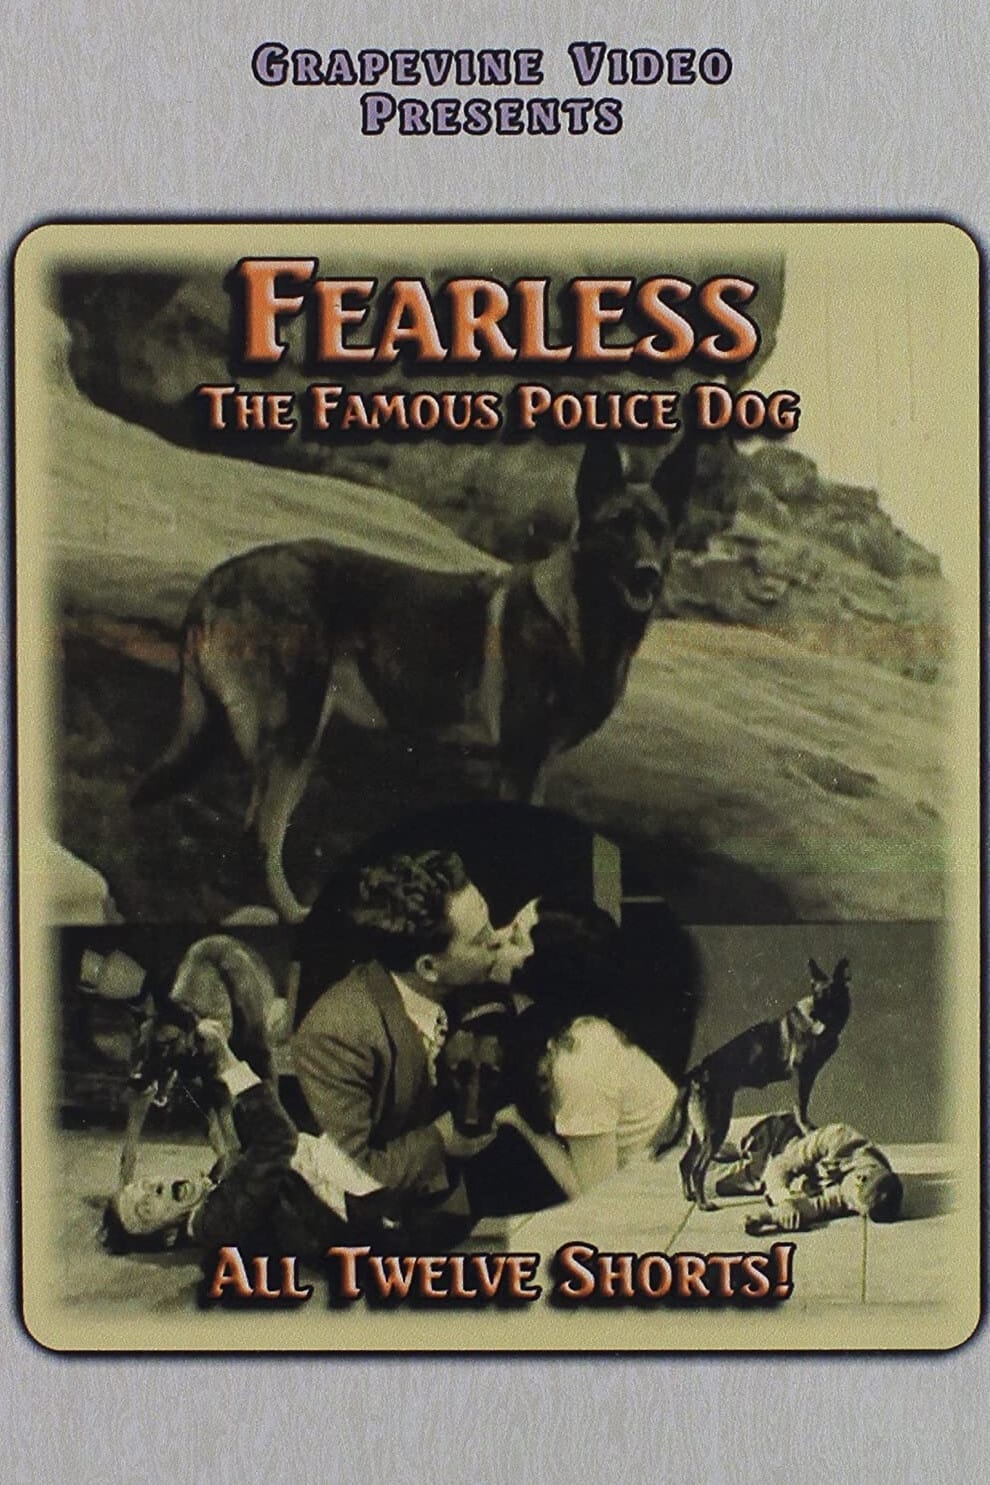 Dog of Dogs (1926)